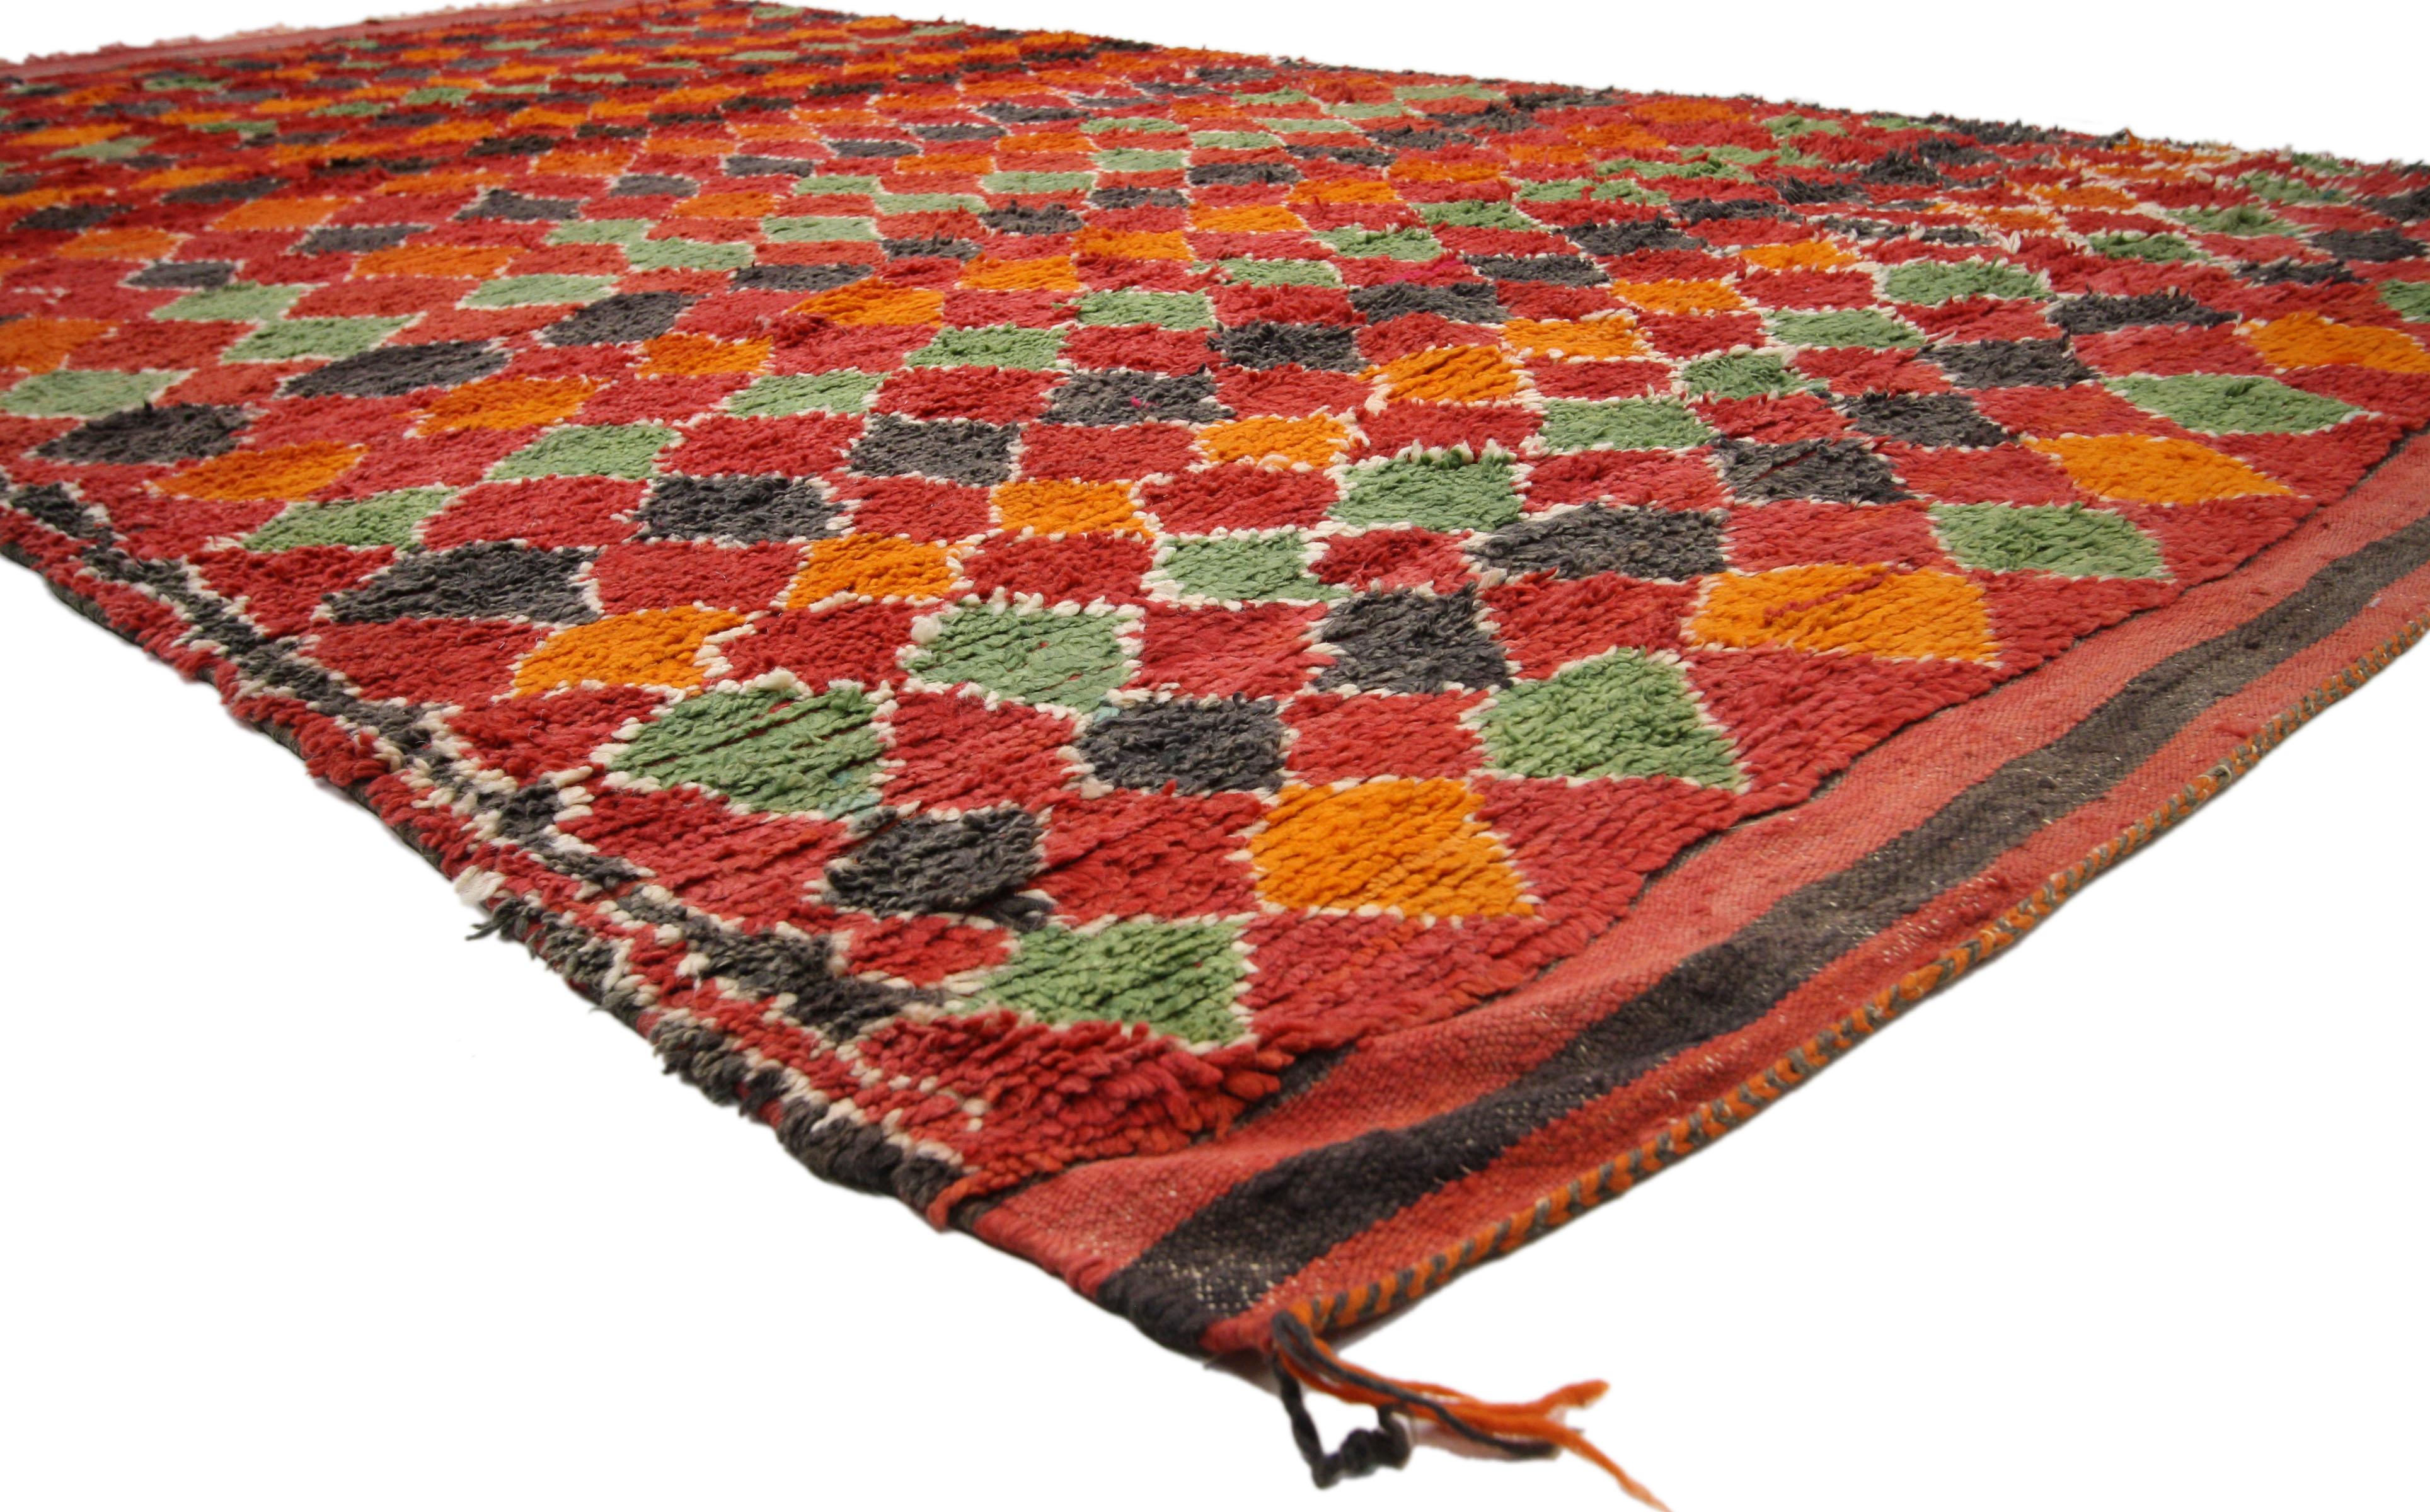 Vintage Berber Red Moroccan Rug with Diamond Pattern and Modern Tribal Style In Good Condition For Sale In Dallas, TX